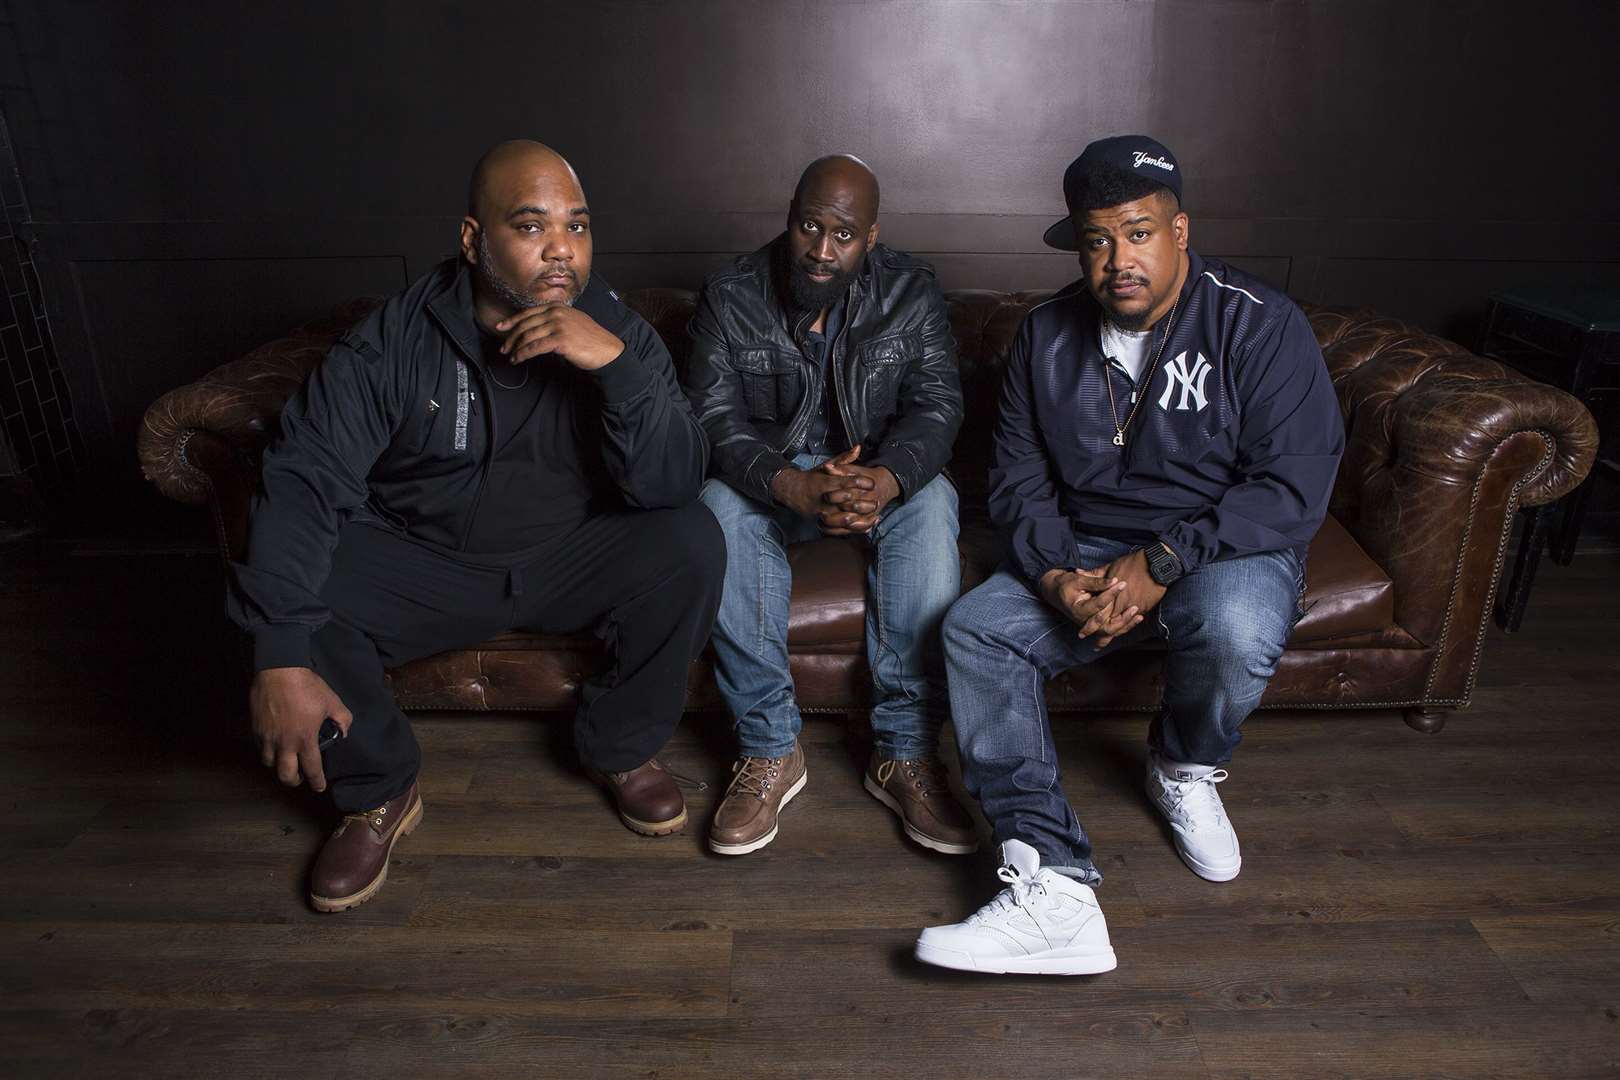 De La Soul had to pull out of a show at Dreamland due to ill health